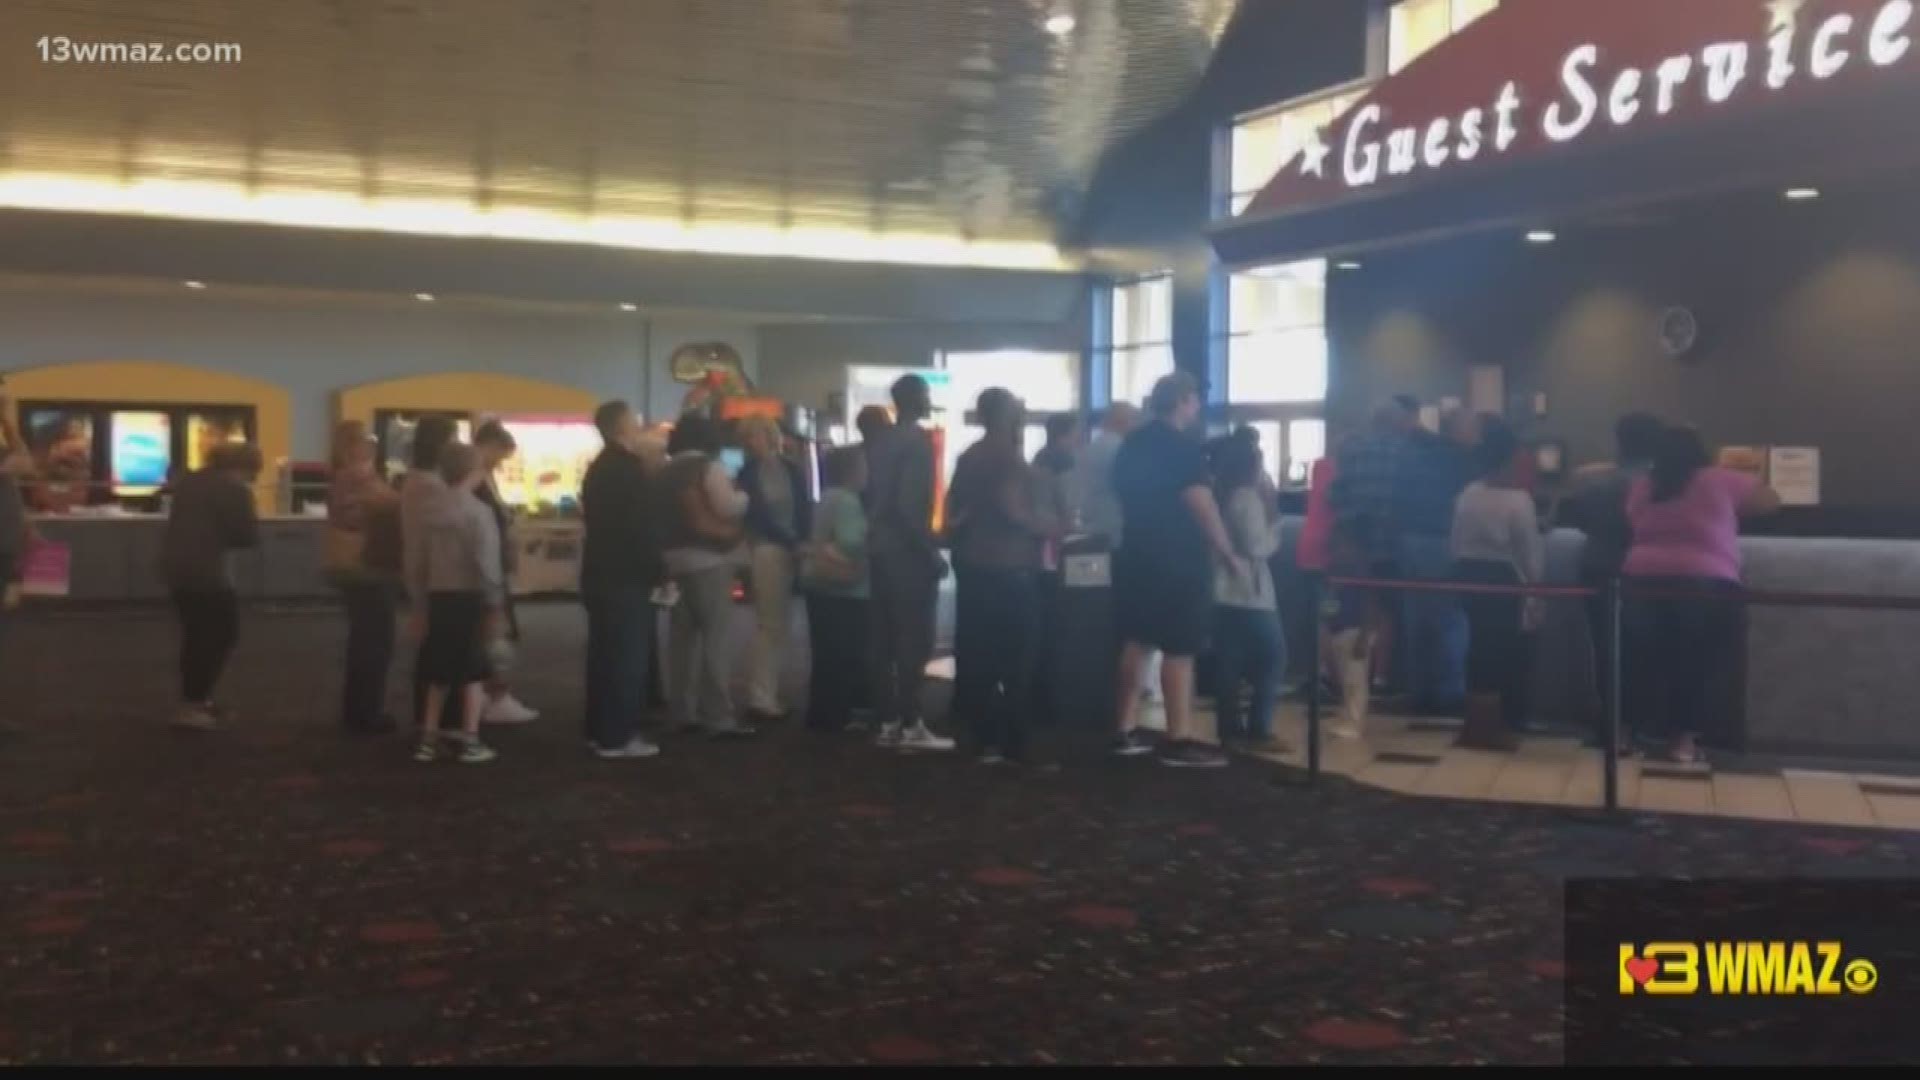 Commissioners said the proposal raises safety concerns considering the number of children who might be wanting to watch a movie at AmStar Macon.